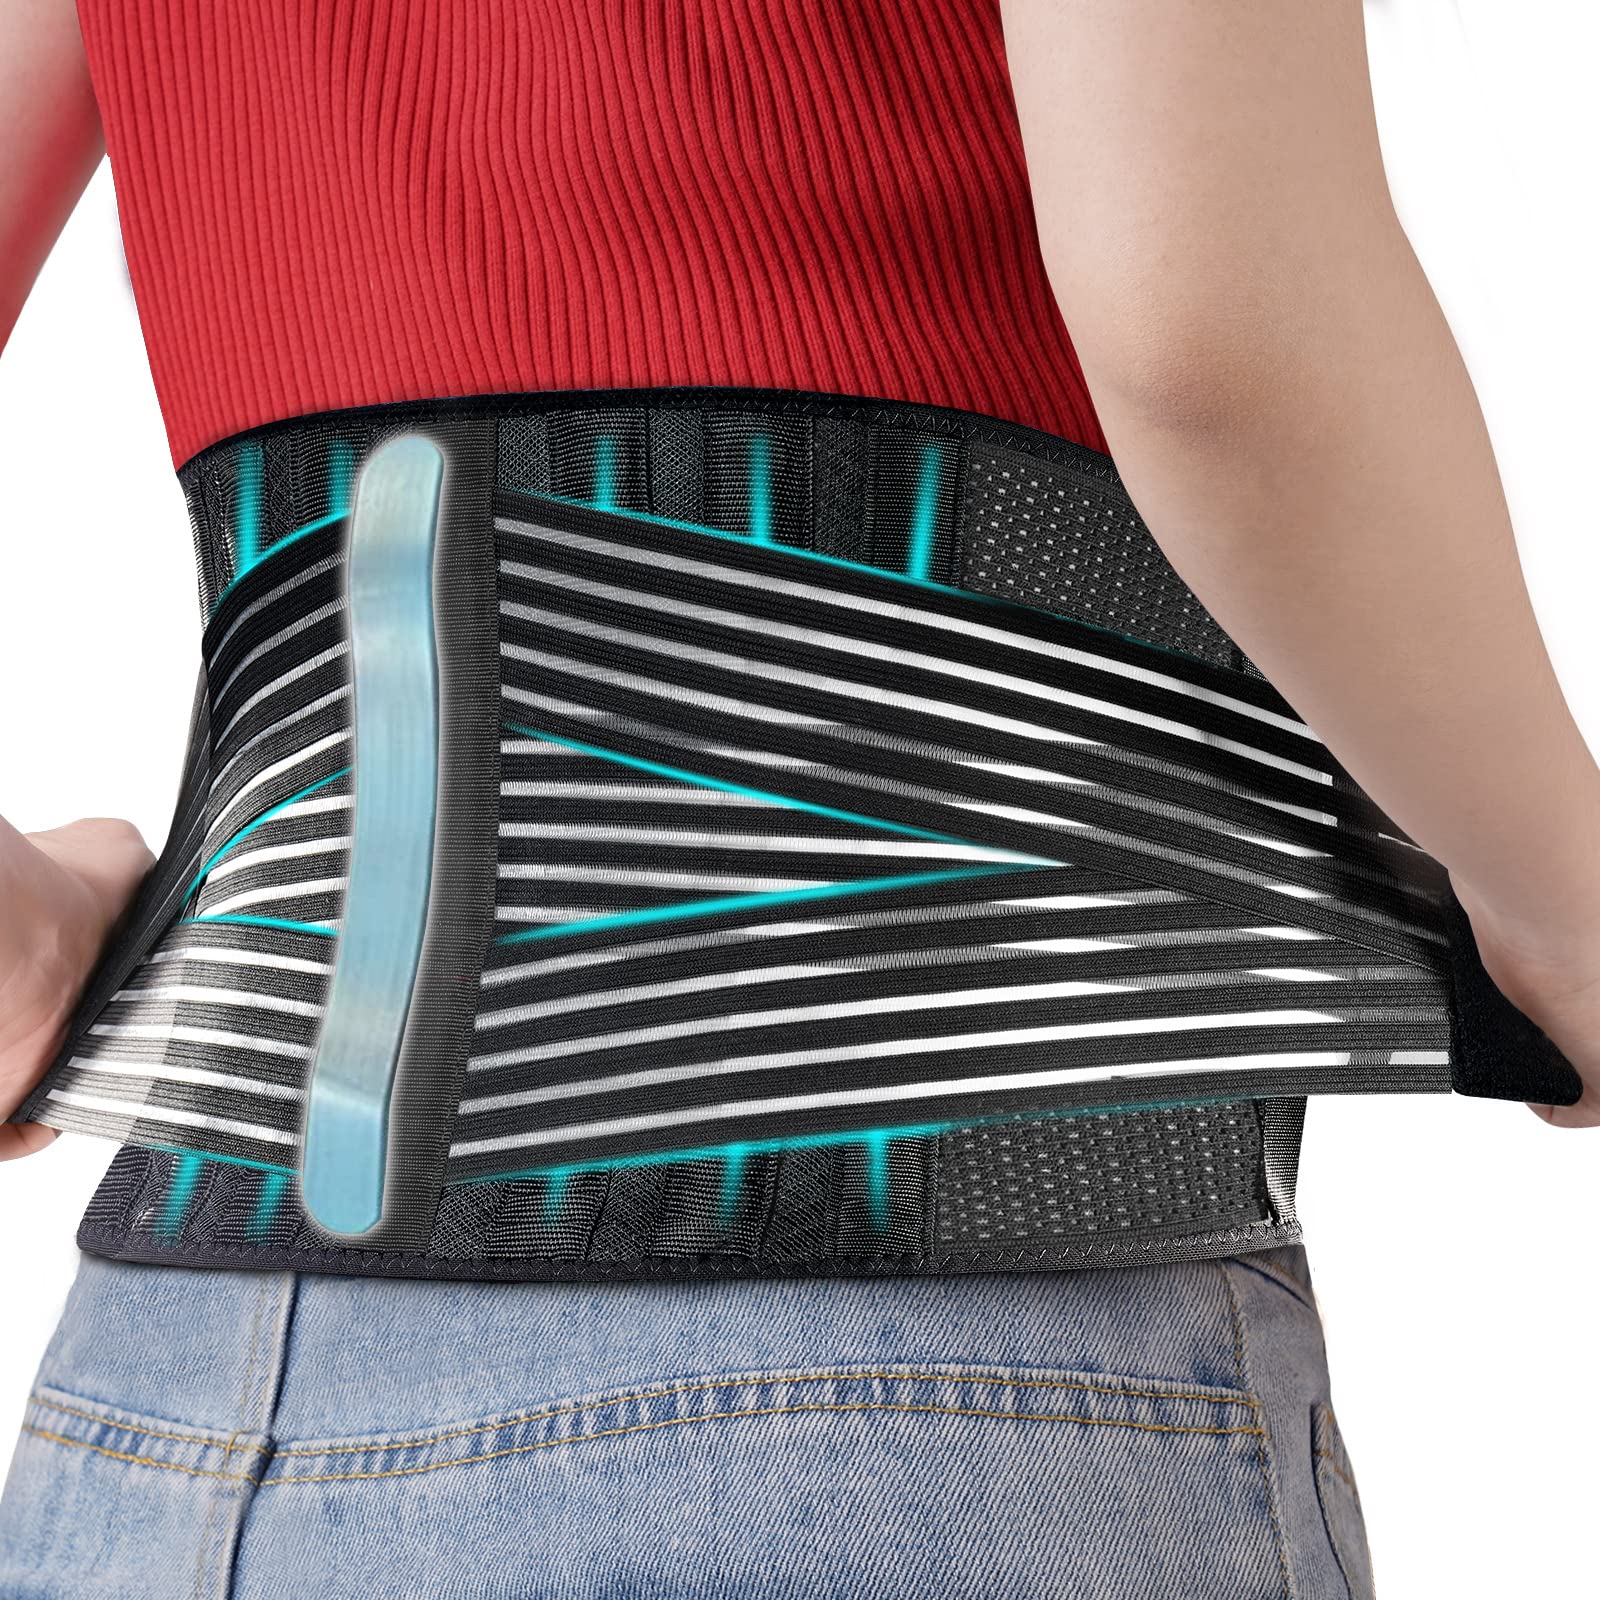 FEATOL Back Brace for Lower Back Pain Back Support Belt for Women & Men Breathable Lower Back Brace with Lumbar Pad Lower Back Pain Relief for